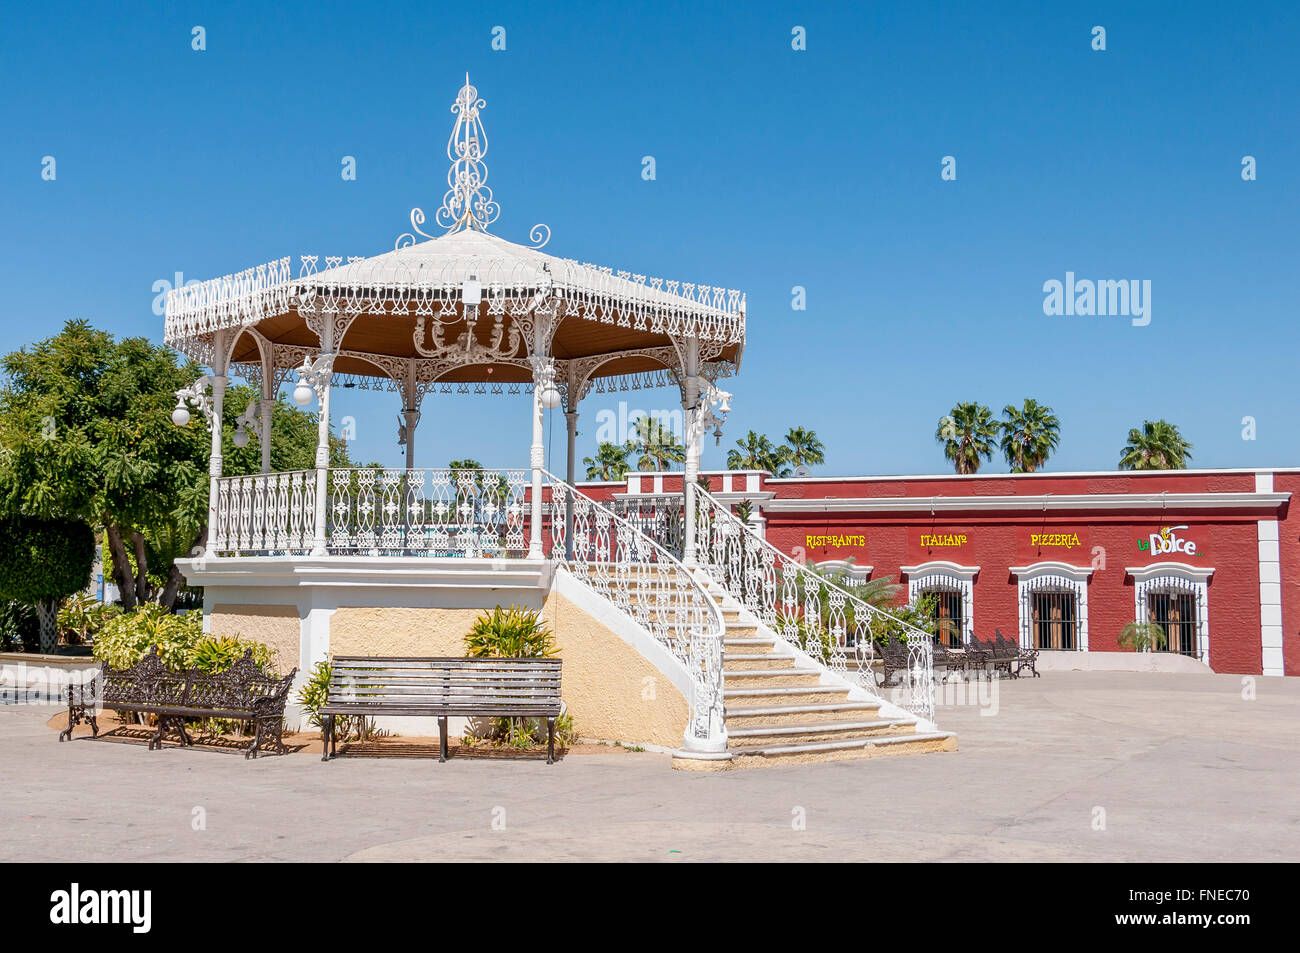 The kiosko or gazebo in San Jose del Cabo's main square in Old Town, with benches beside and colorful red restaurant behind. Stock Photo